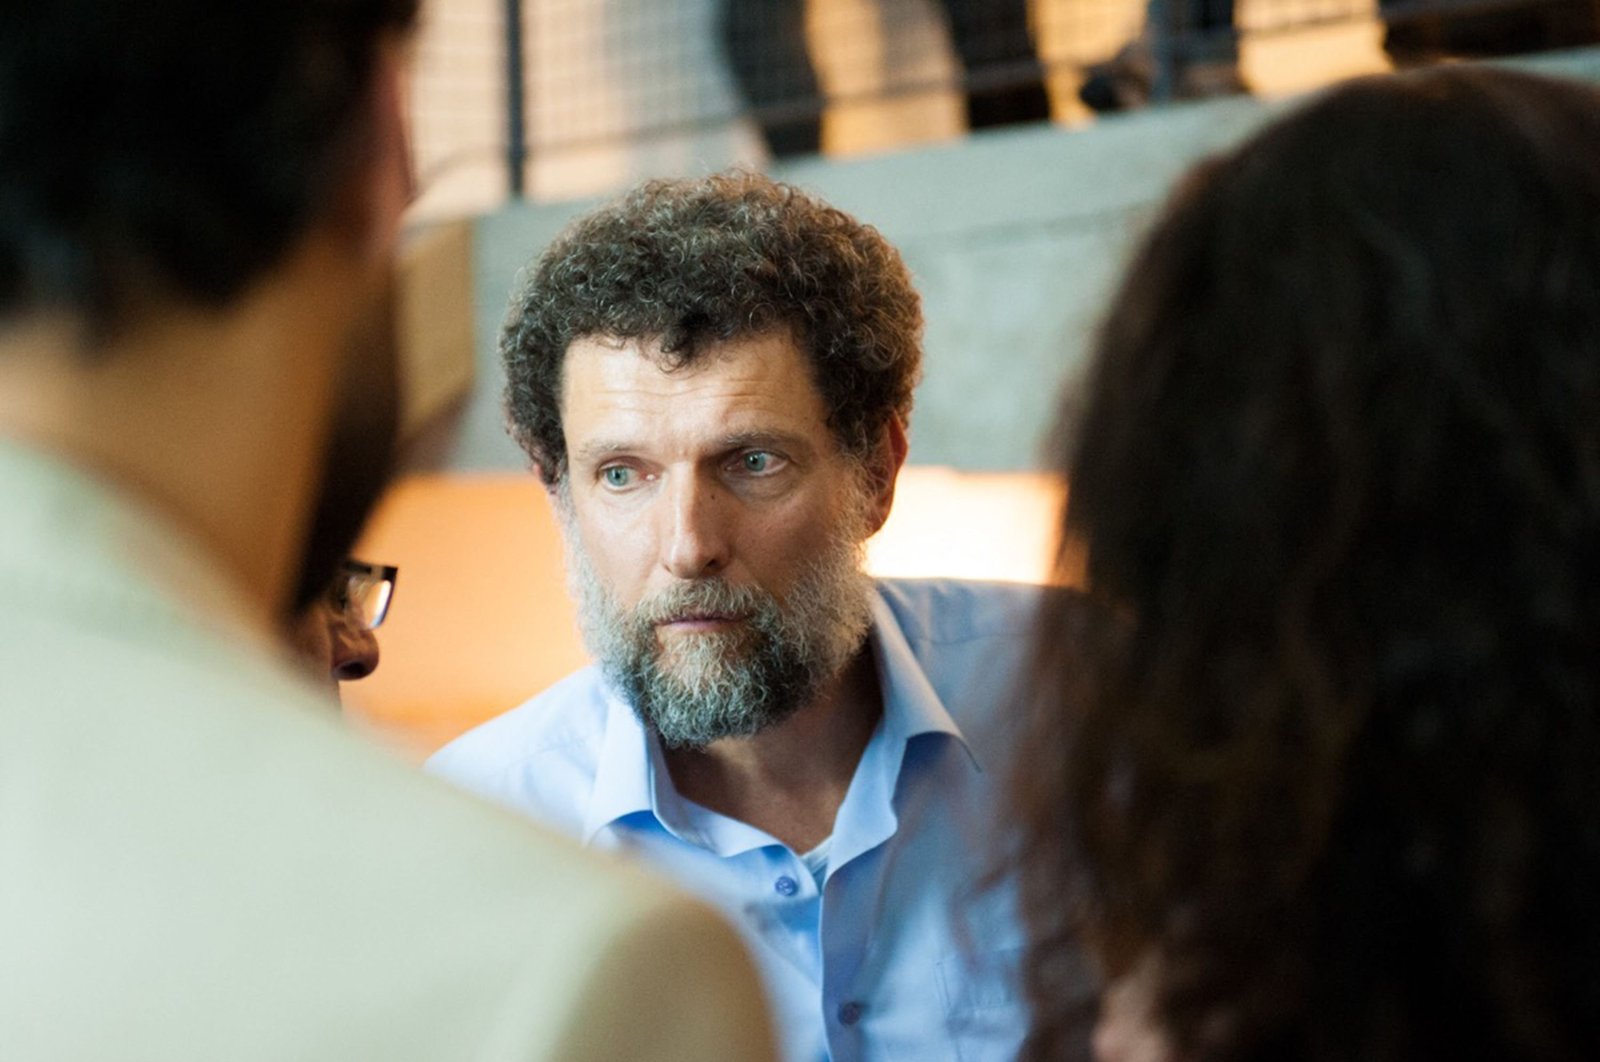 This undated handout photograph released on Oct. 15, 2021, by the Anadolu Culture Center shows Osman Kavala speaking during an event in Istanbul, Turkey. (AFP Photo)